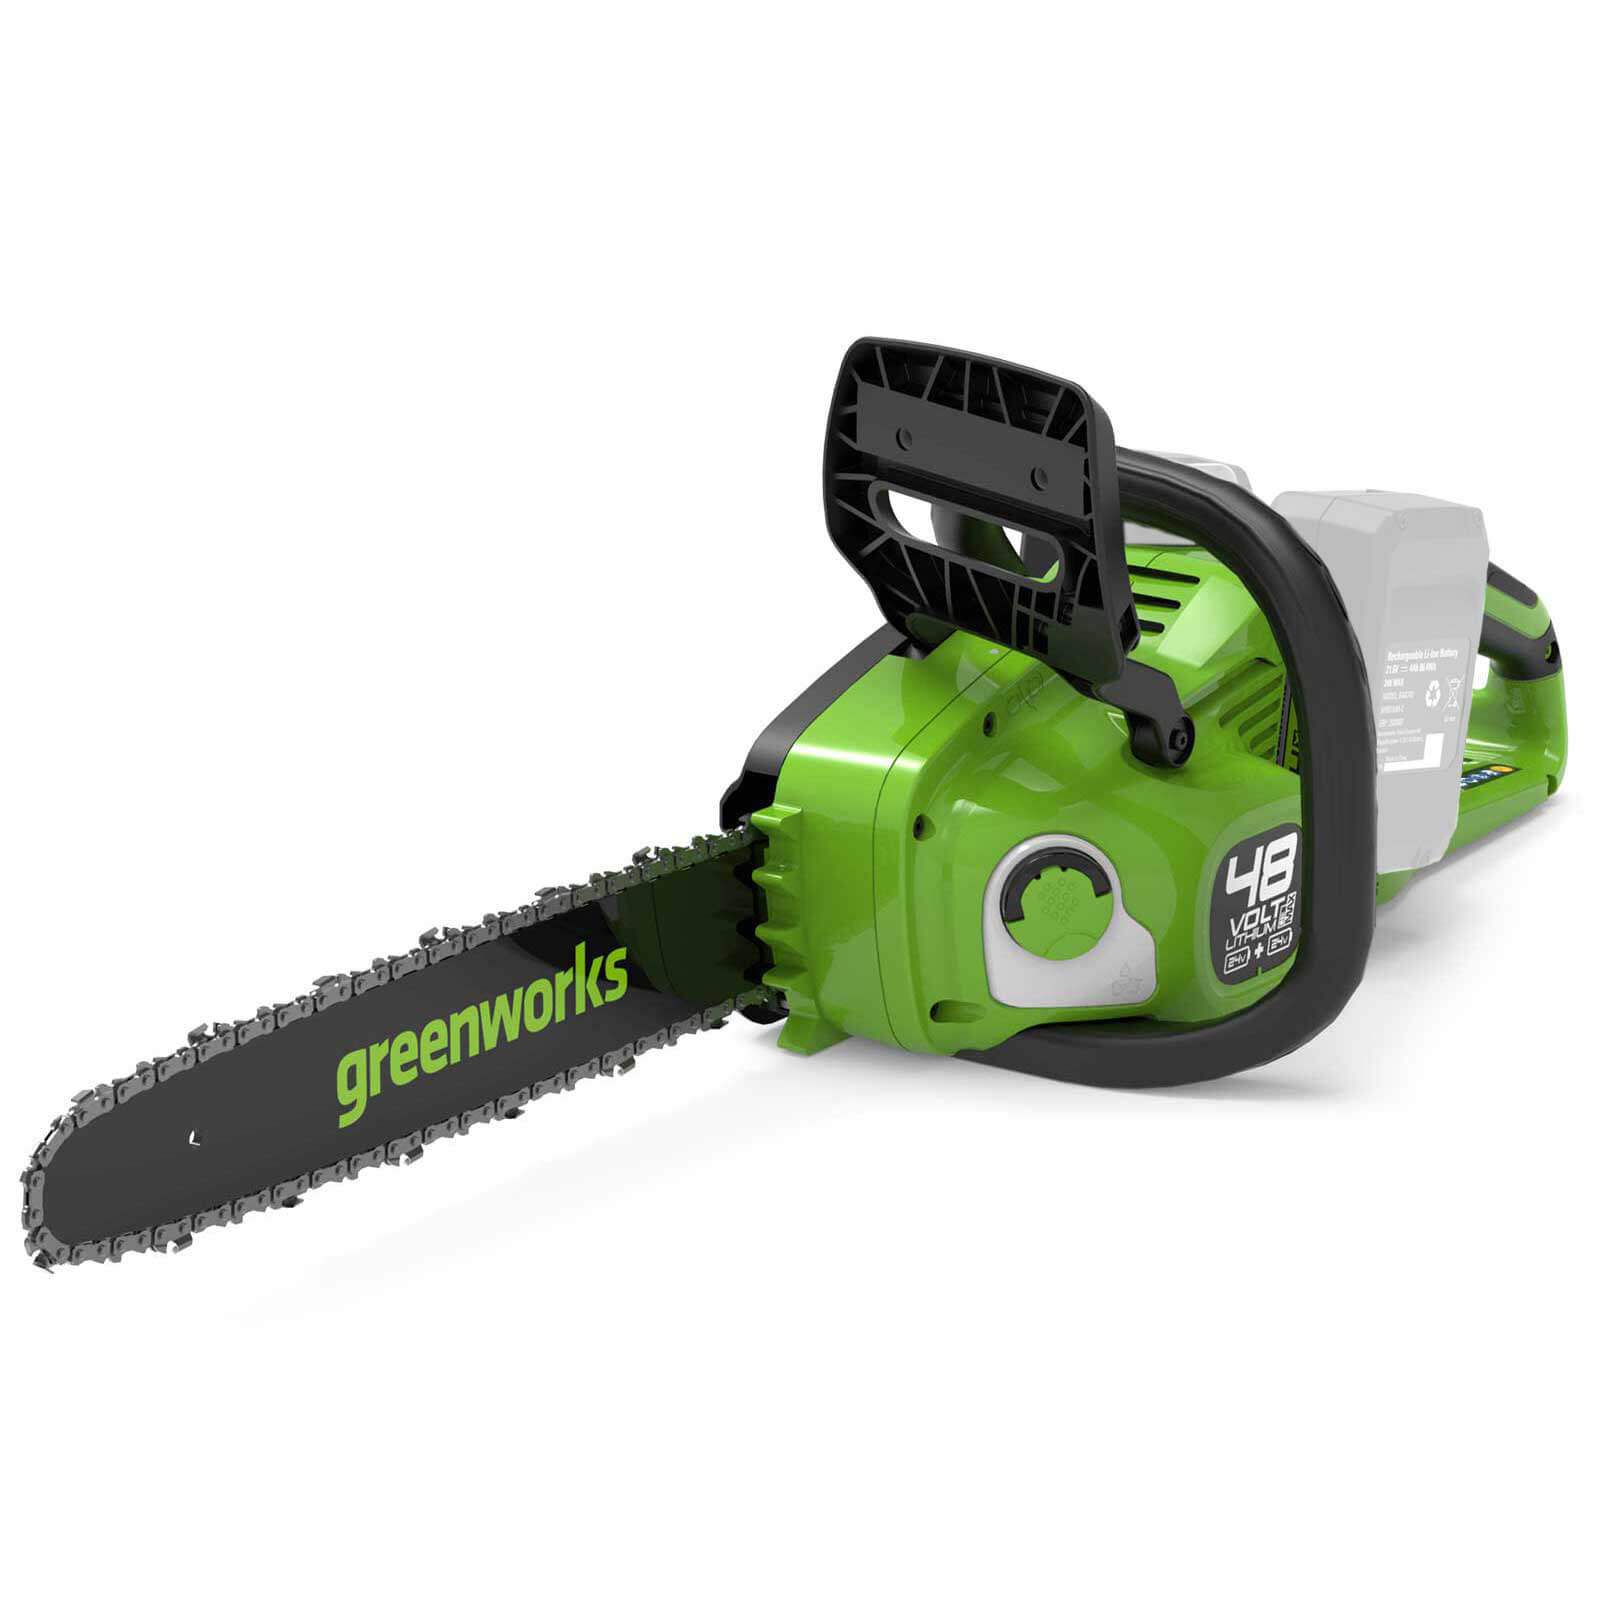 Greenworks GD24X2CS36 48v Cordless Chainsaw 360mm No Batteries No Charger